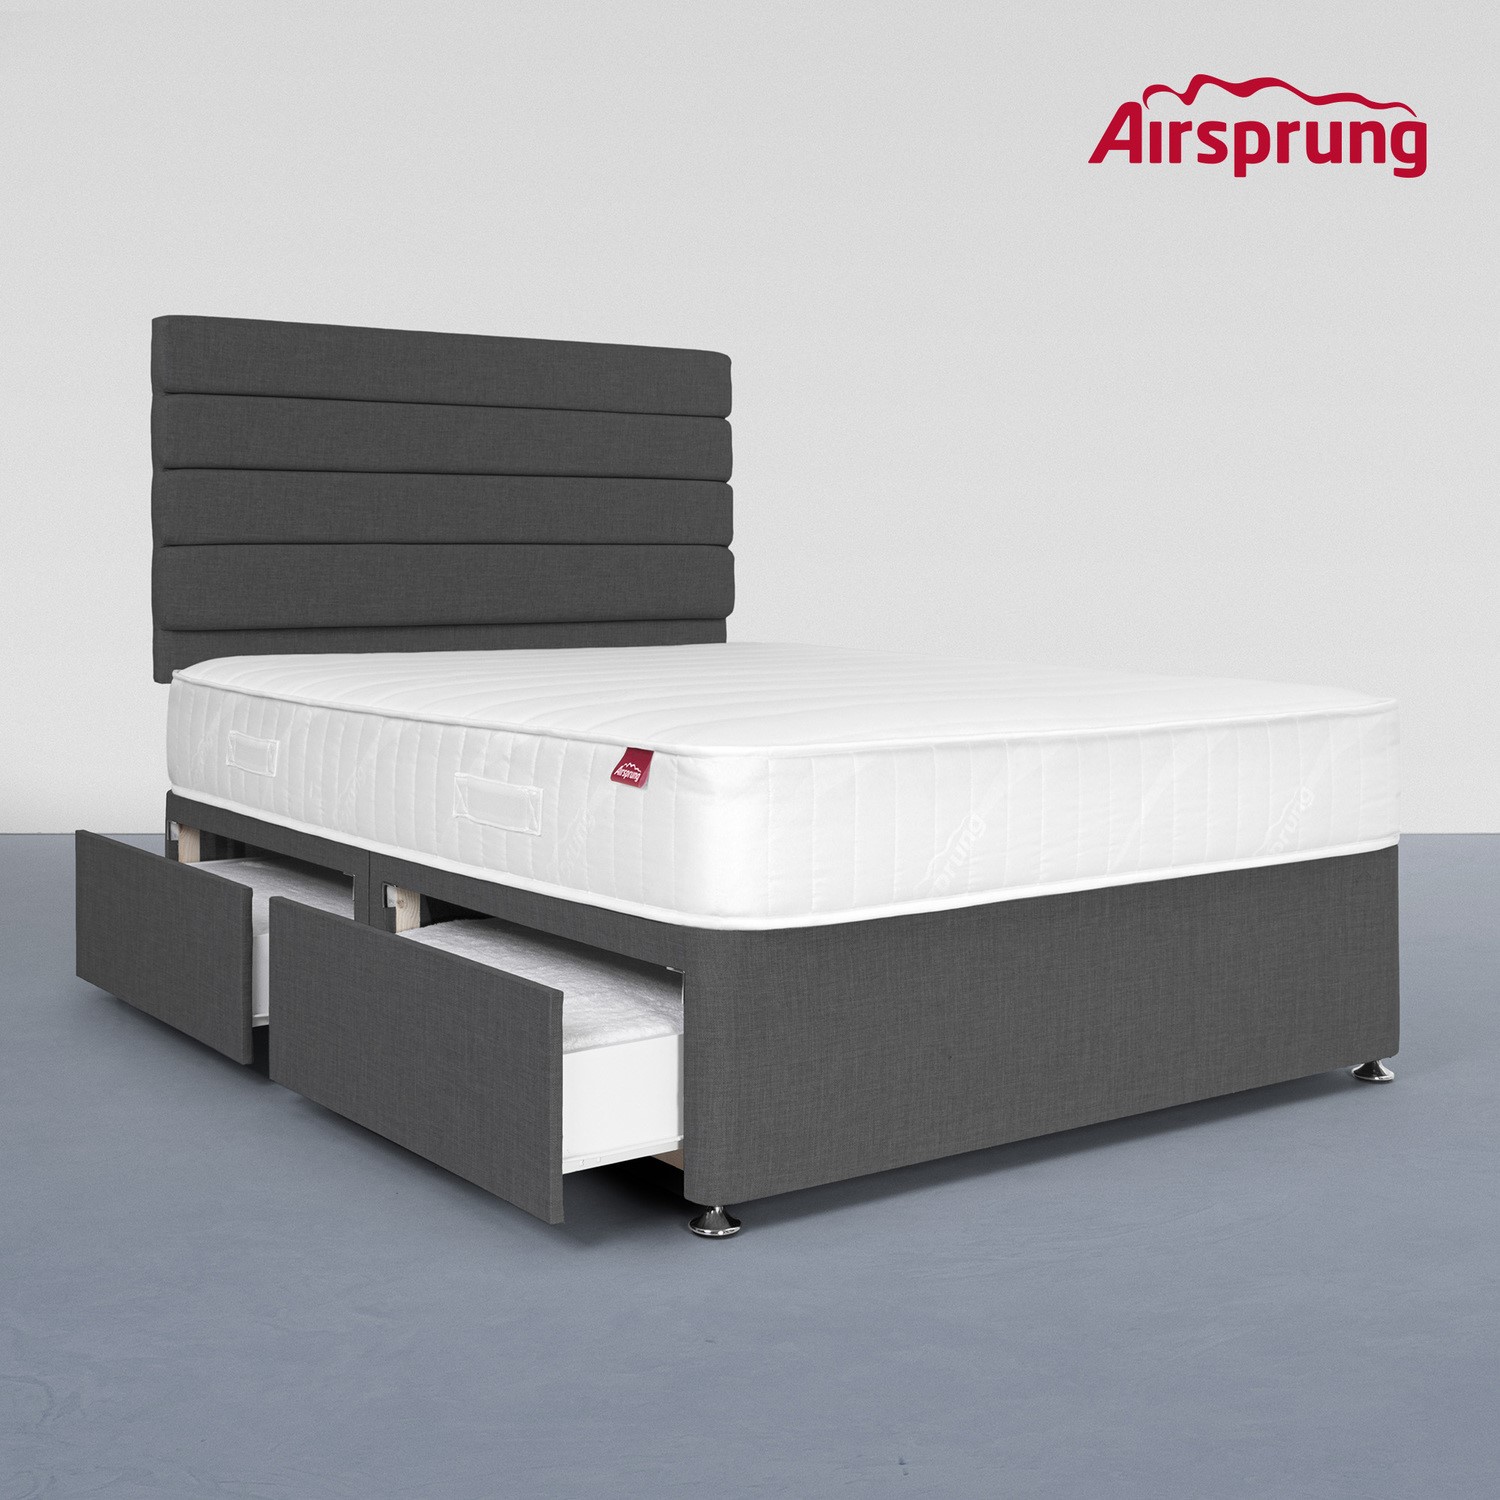 Read more about Airsprung king size 4 drawer divan bed with hybrid mattress charcoal